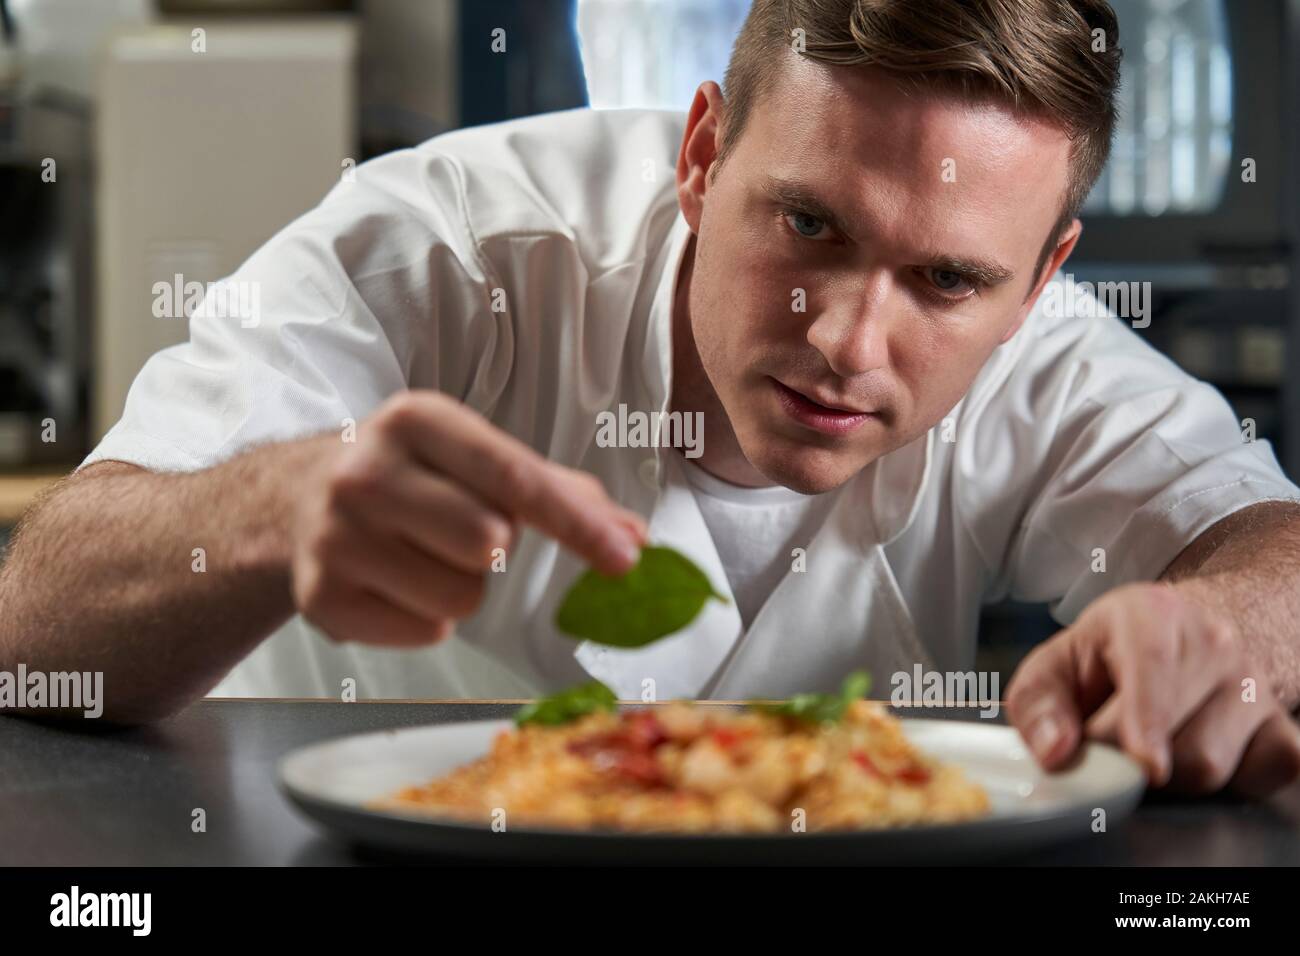 Male Chef Garnishing Plate Of Food In Professional Kitchen Stock Photo